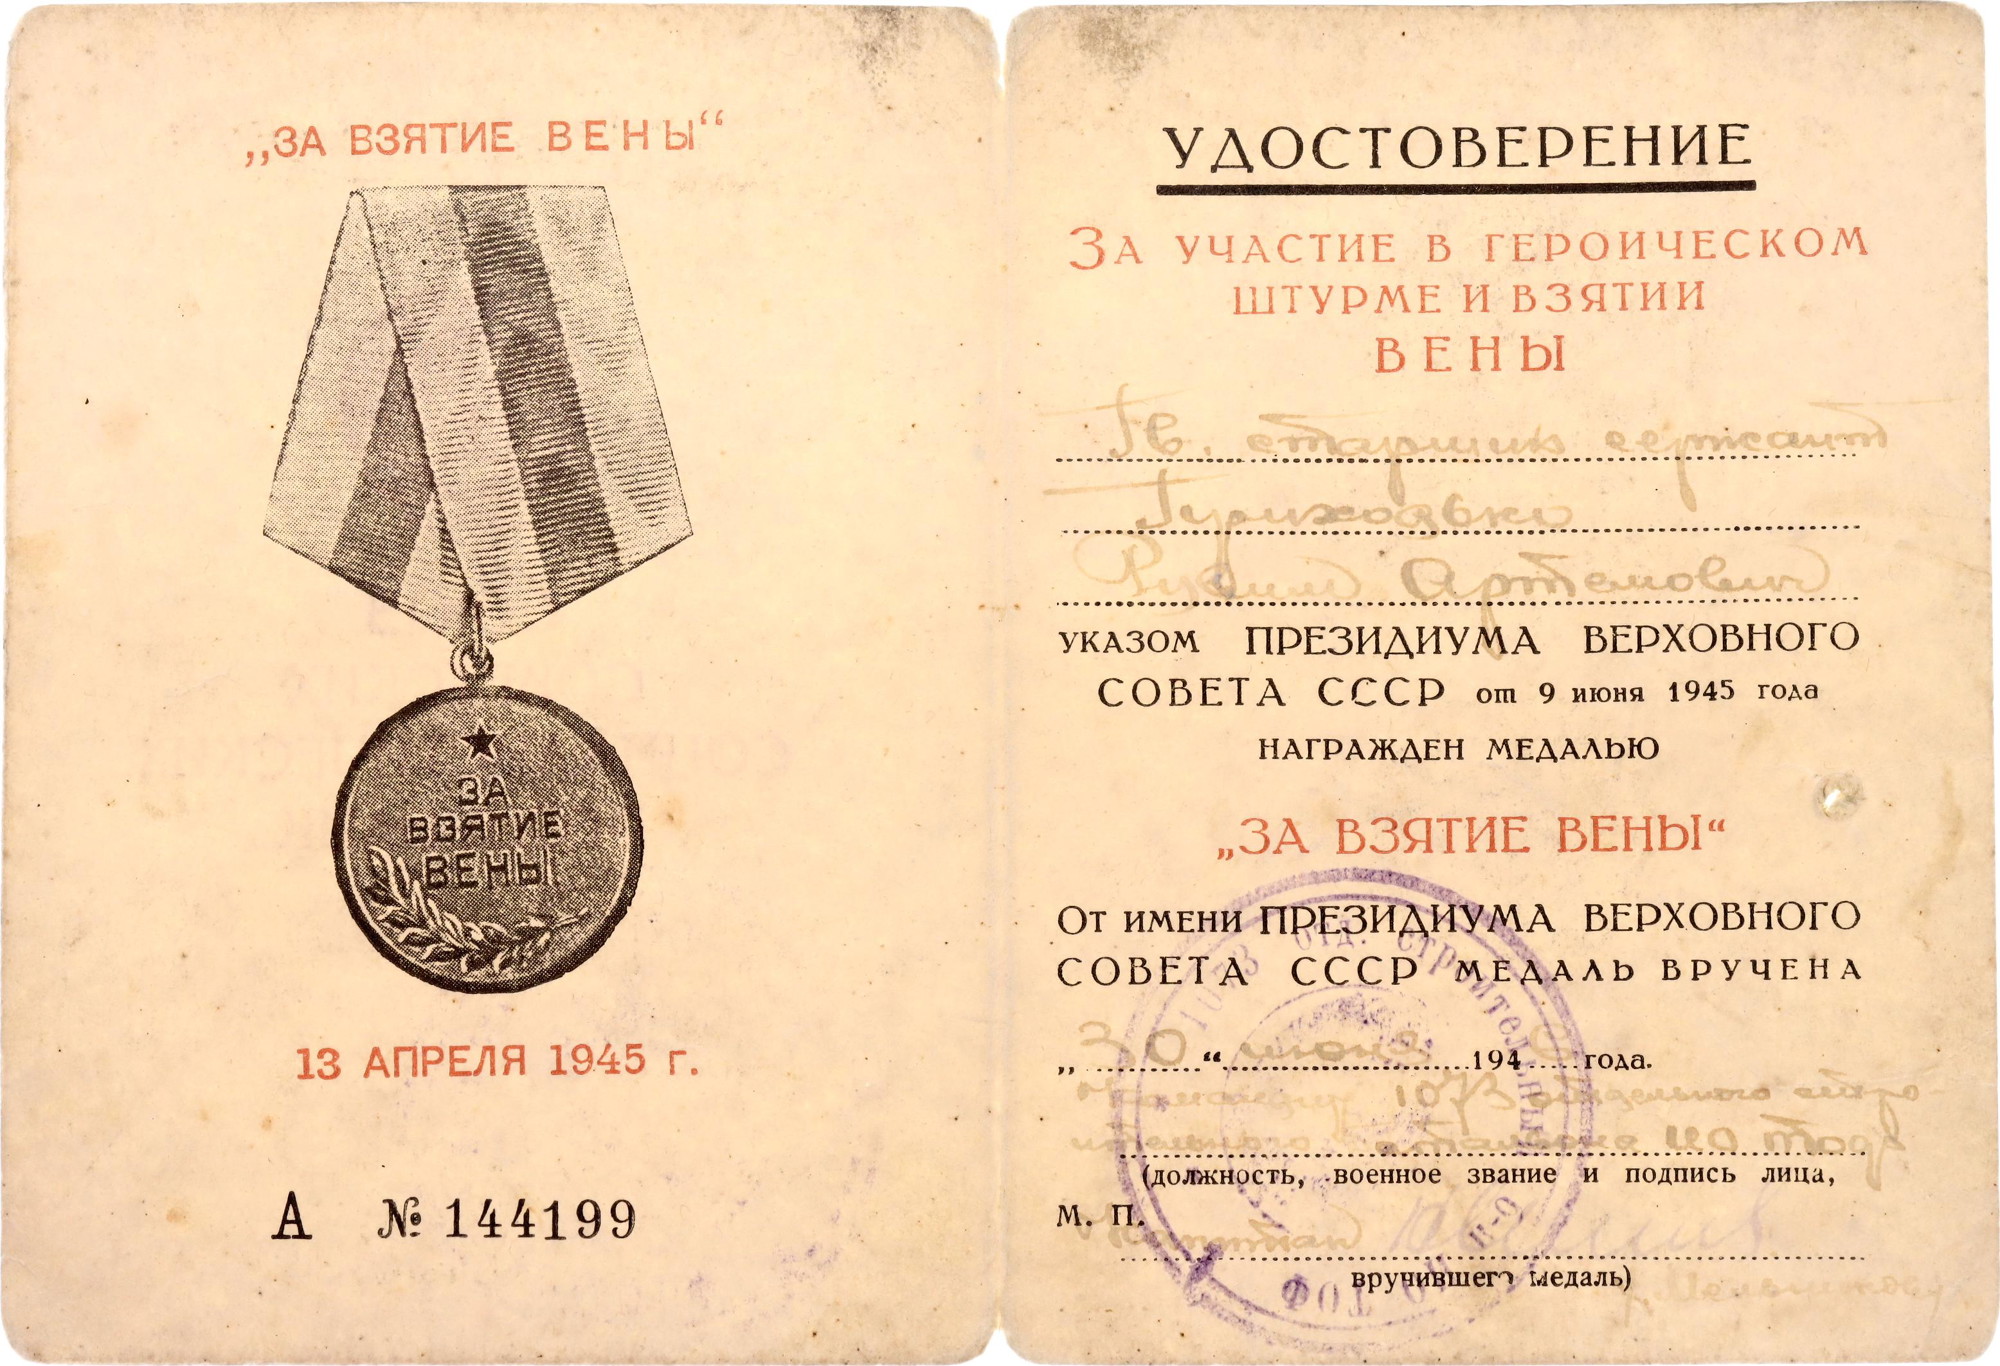 Russia - USSR Medal for Capture of Vienna 1945 | Katz Auction